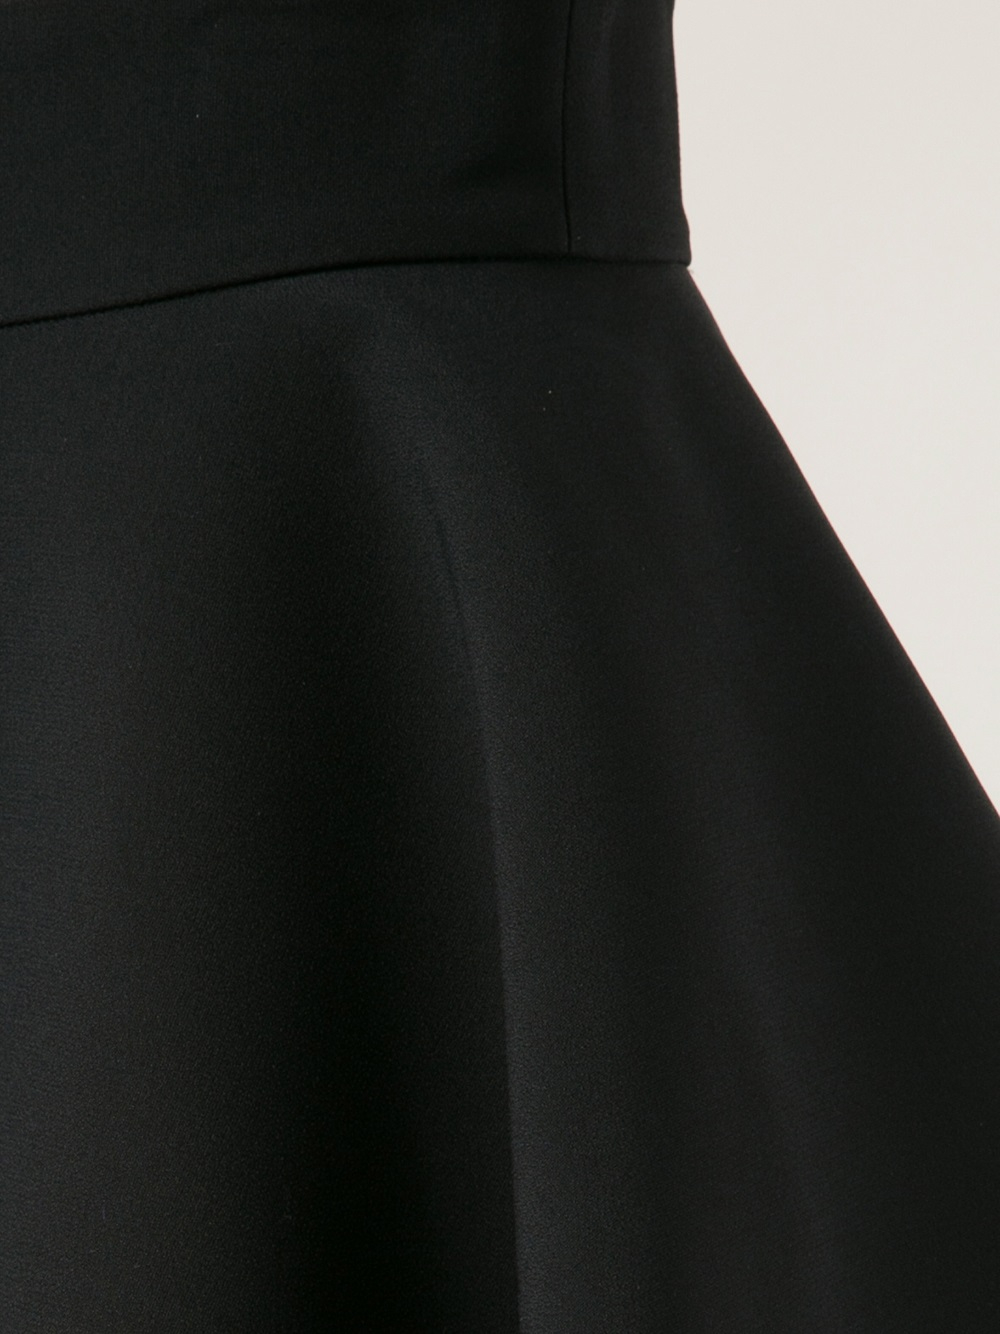 Lyst - Fausto Puglisi Layered Skirt in Black